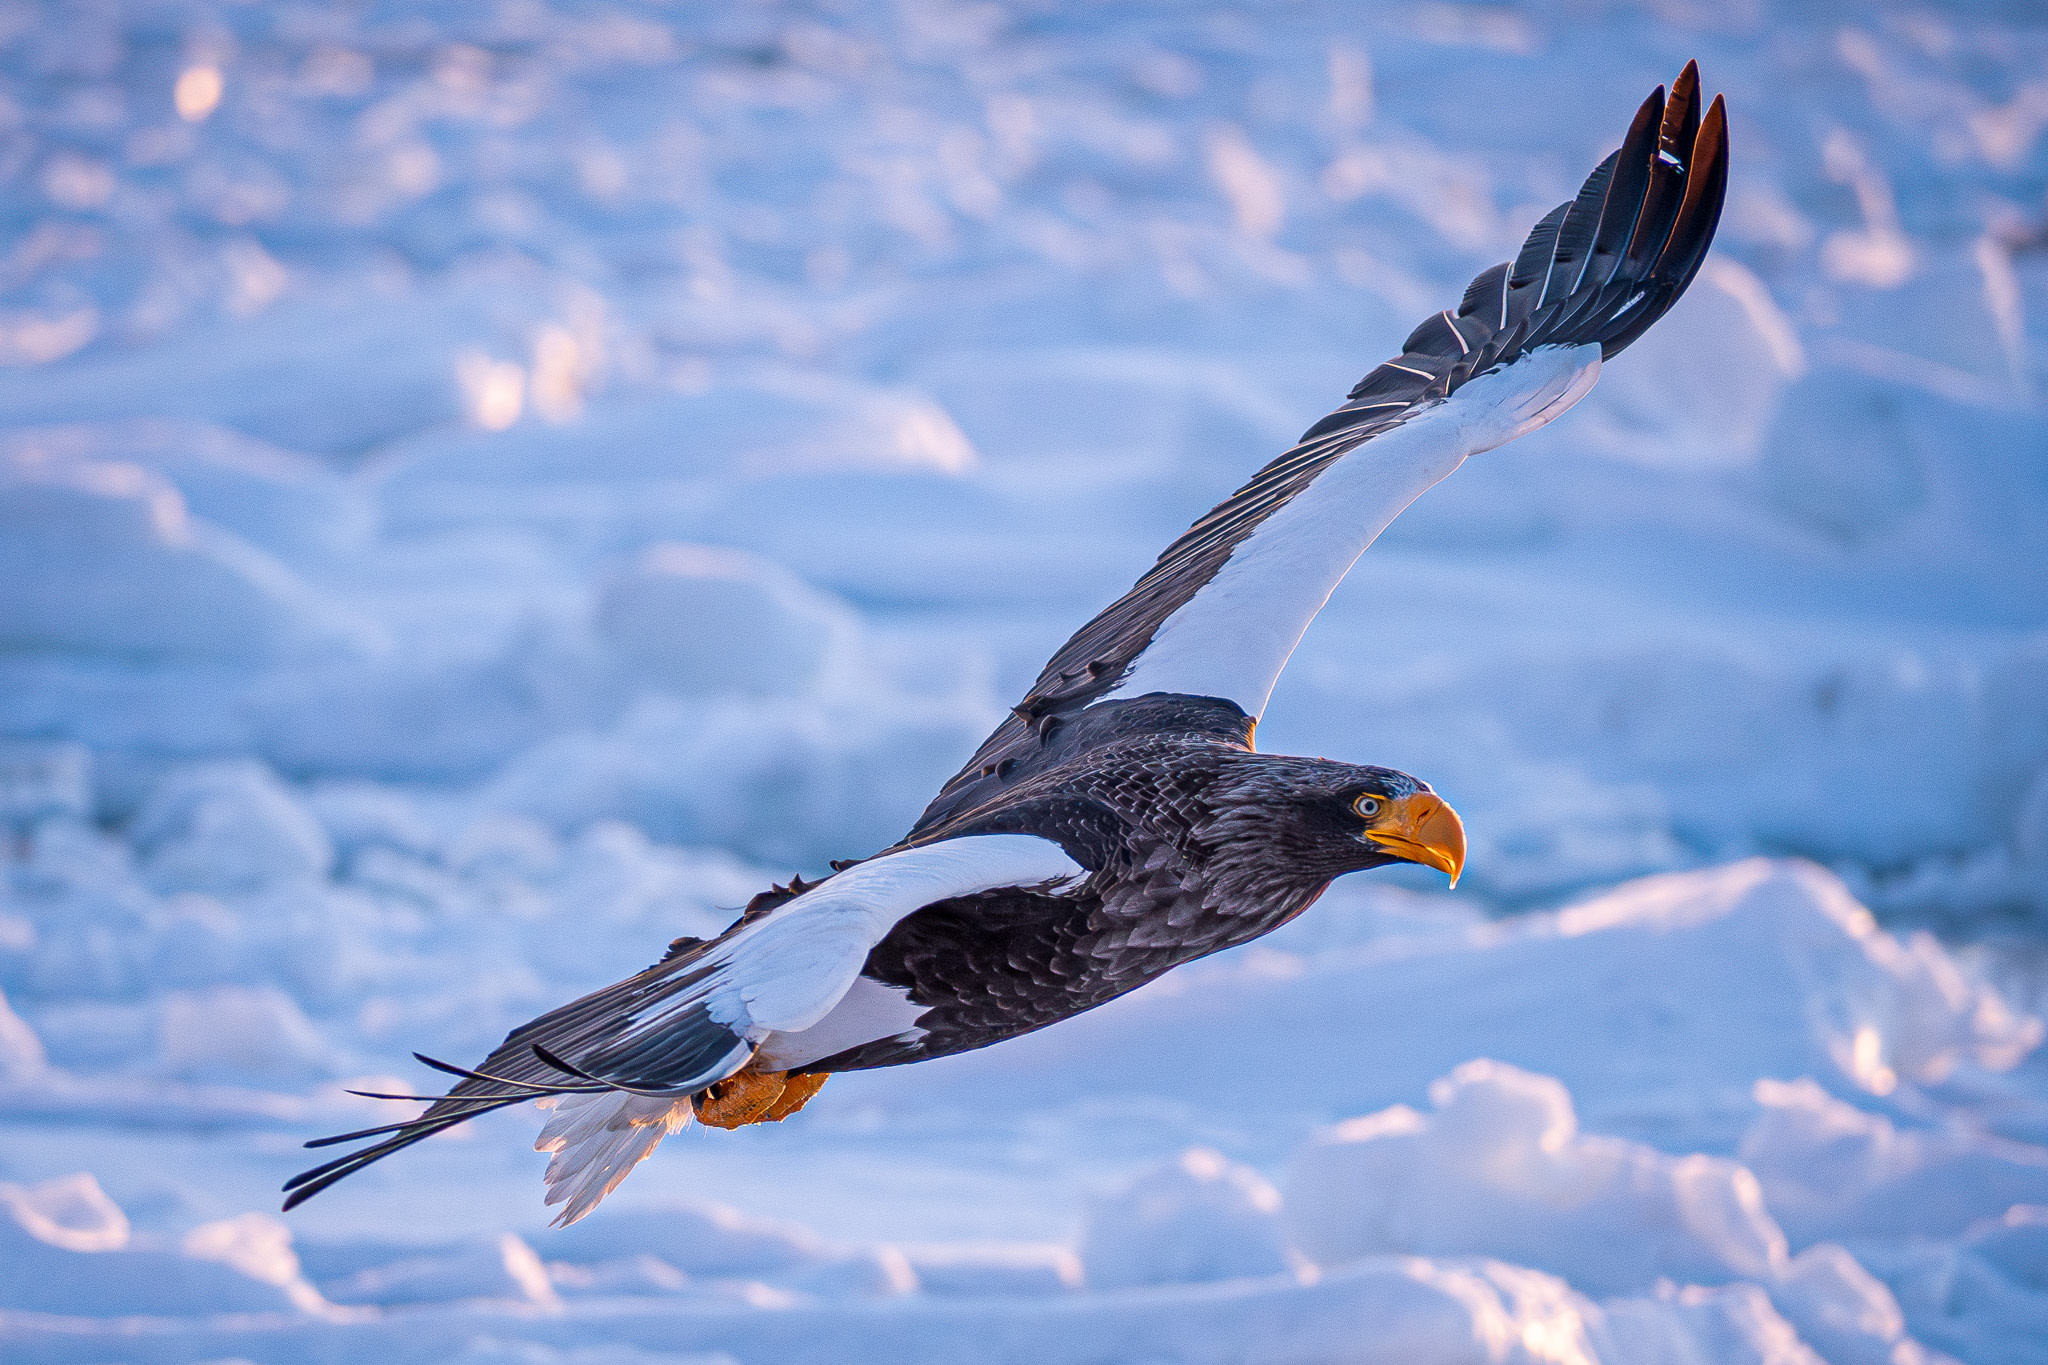 A Steller's Sea Eagle flies low and close over drift ice, eyes alert.